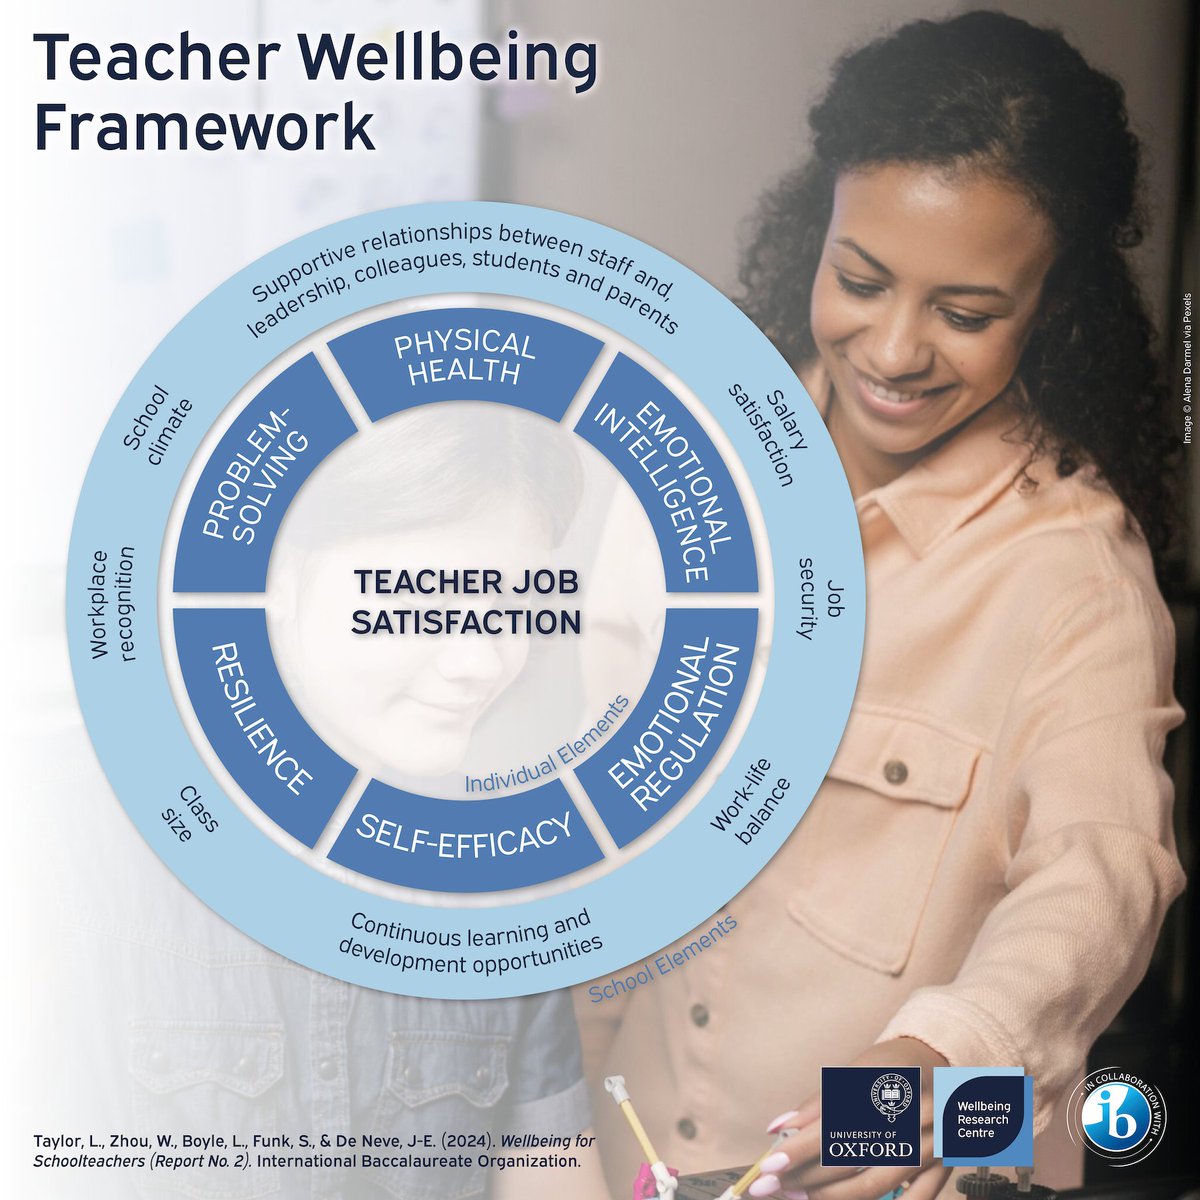 🎯 This Teacher Wellbeing Framework highlights areas which show promise as drivers of teacher #wellbeing. Read more in our Wellbeing for Schoolteachers report, published alongside the @iborganization. Explore 👉 wellbeing.hmc.ox.ac.uk/schools/